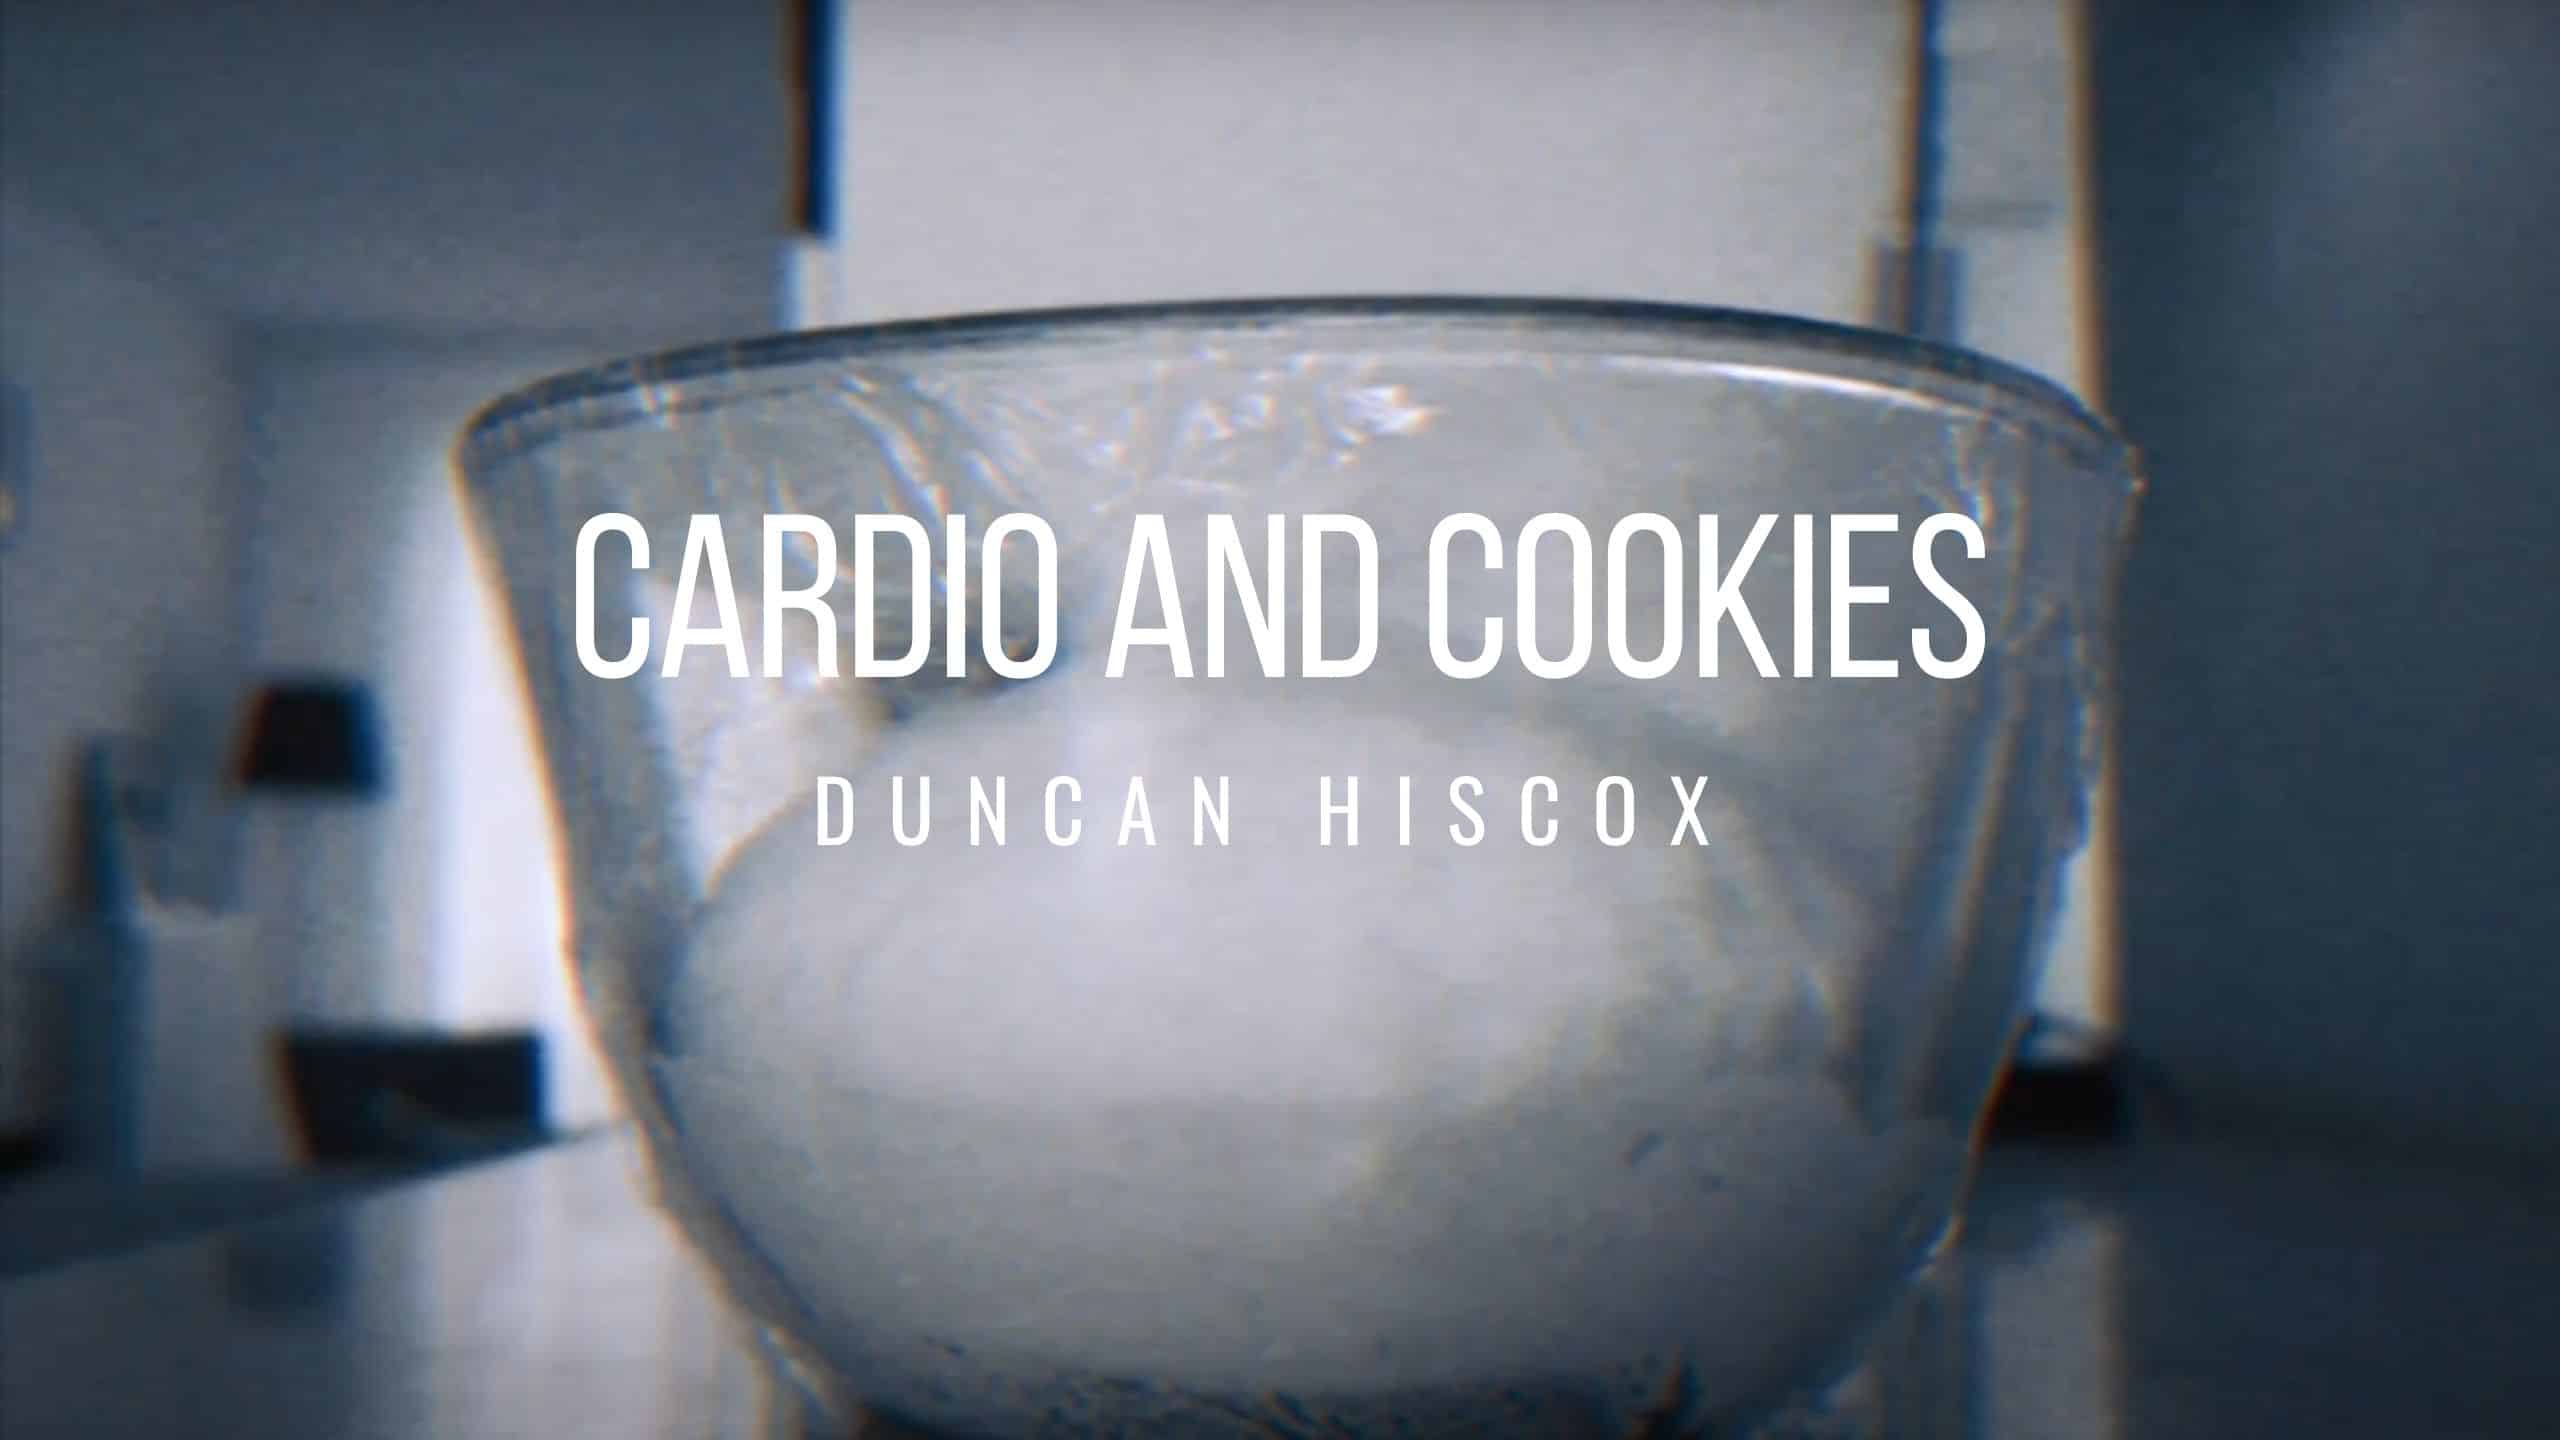 Featured image for “Cardio and Cookies”